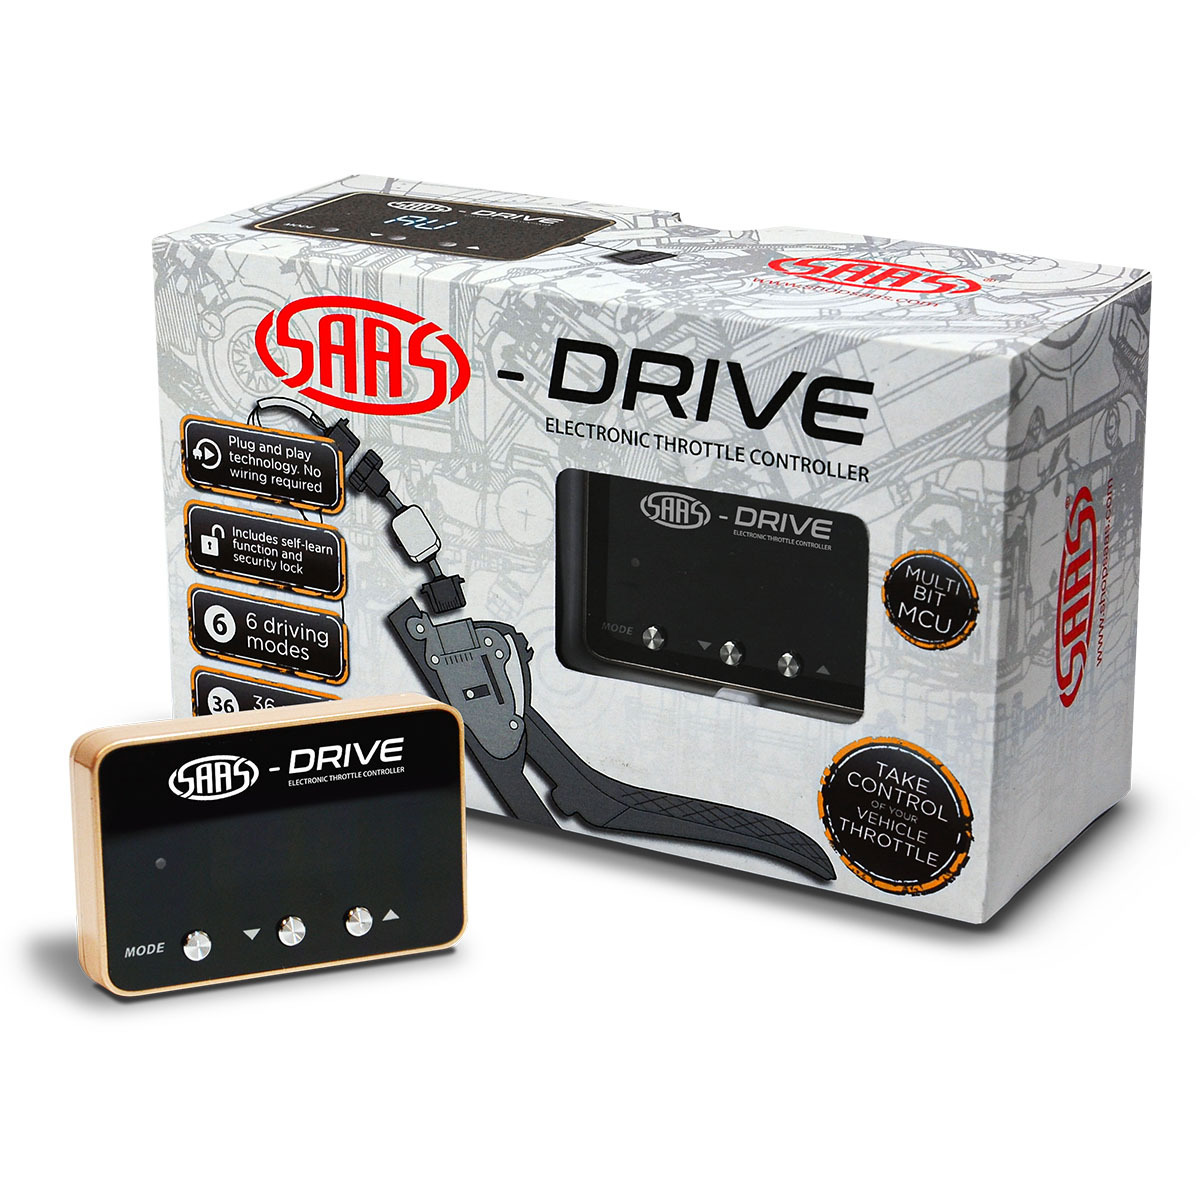 SAAS-Drive Cadillac STS 2005 - 2011 Throttle Controller 